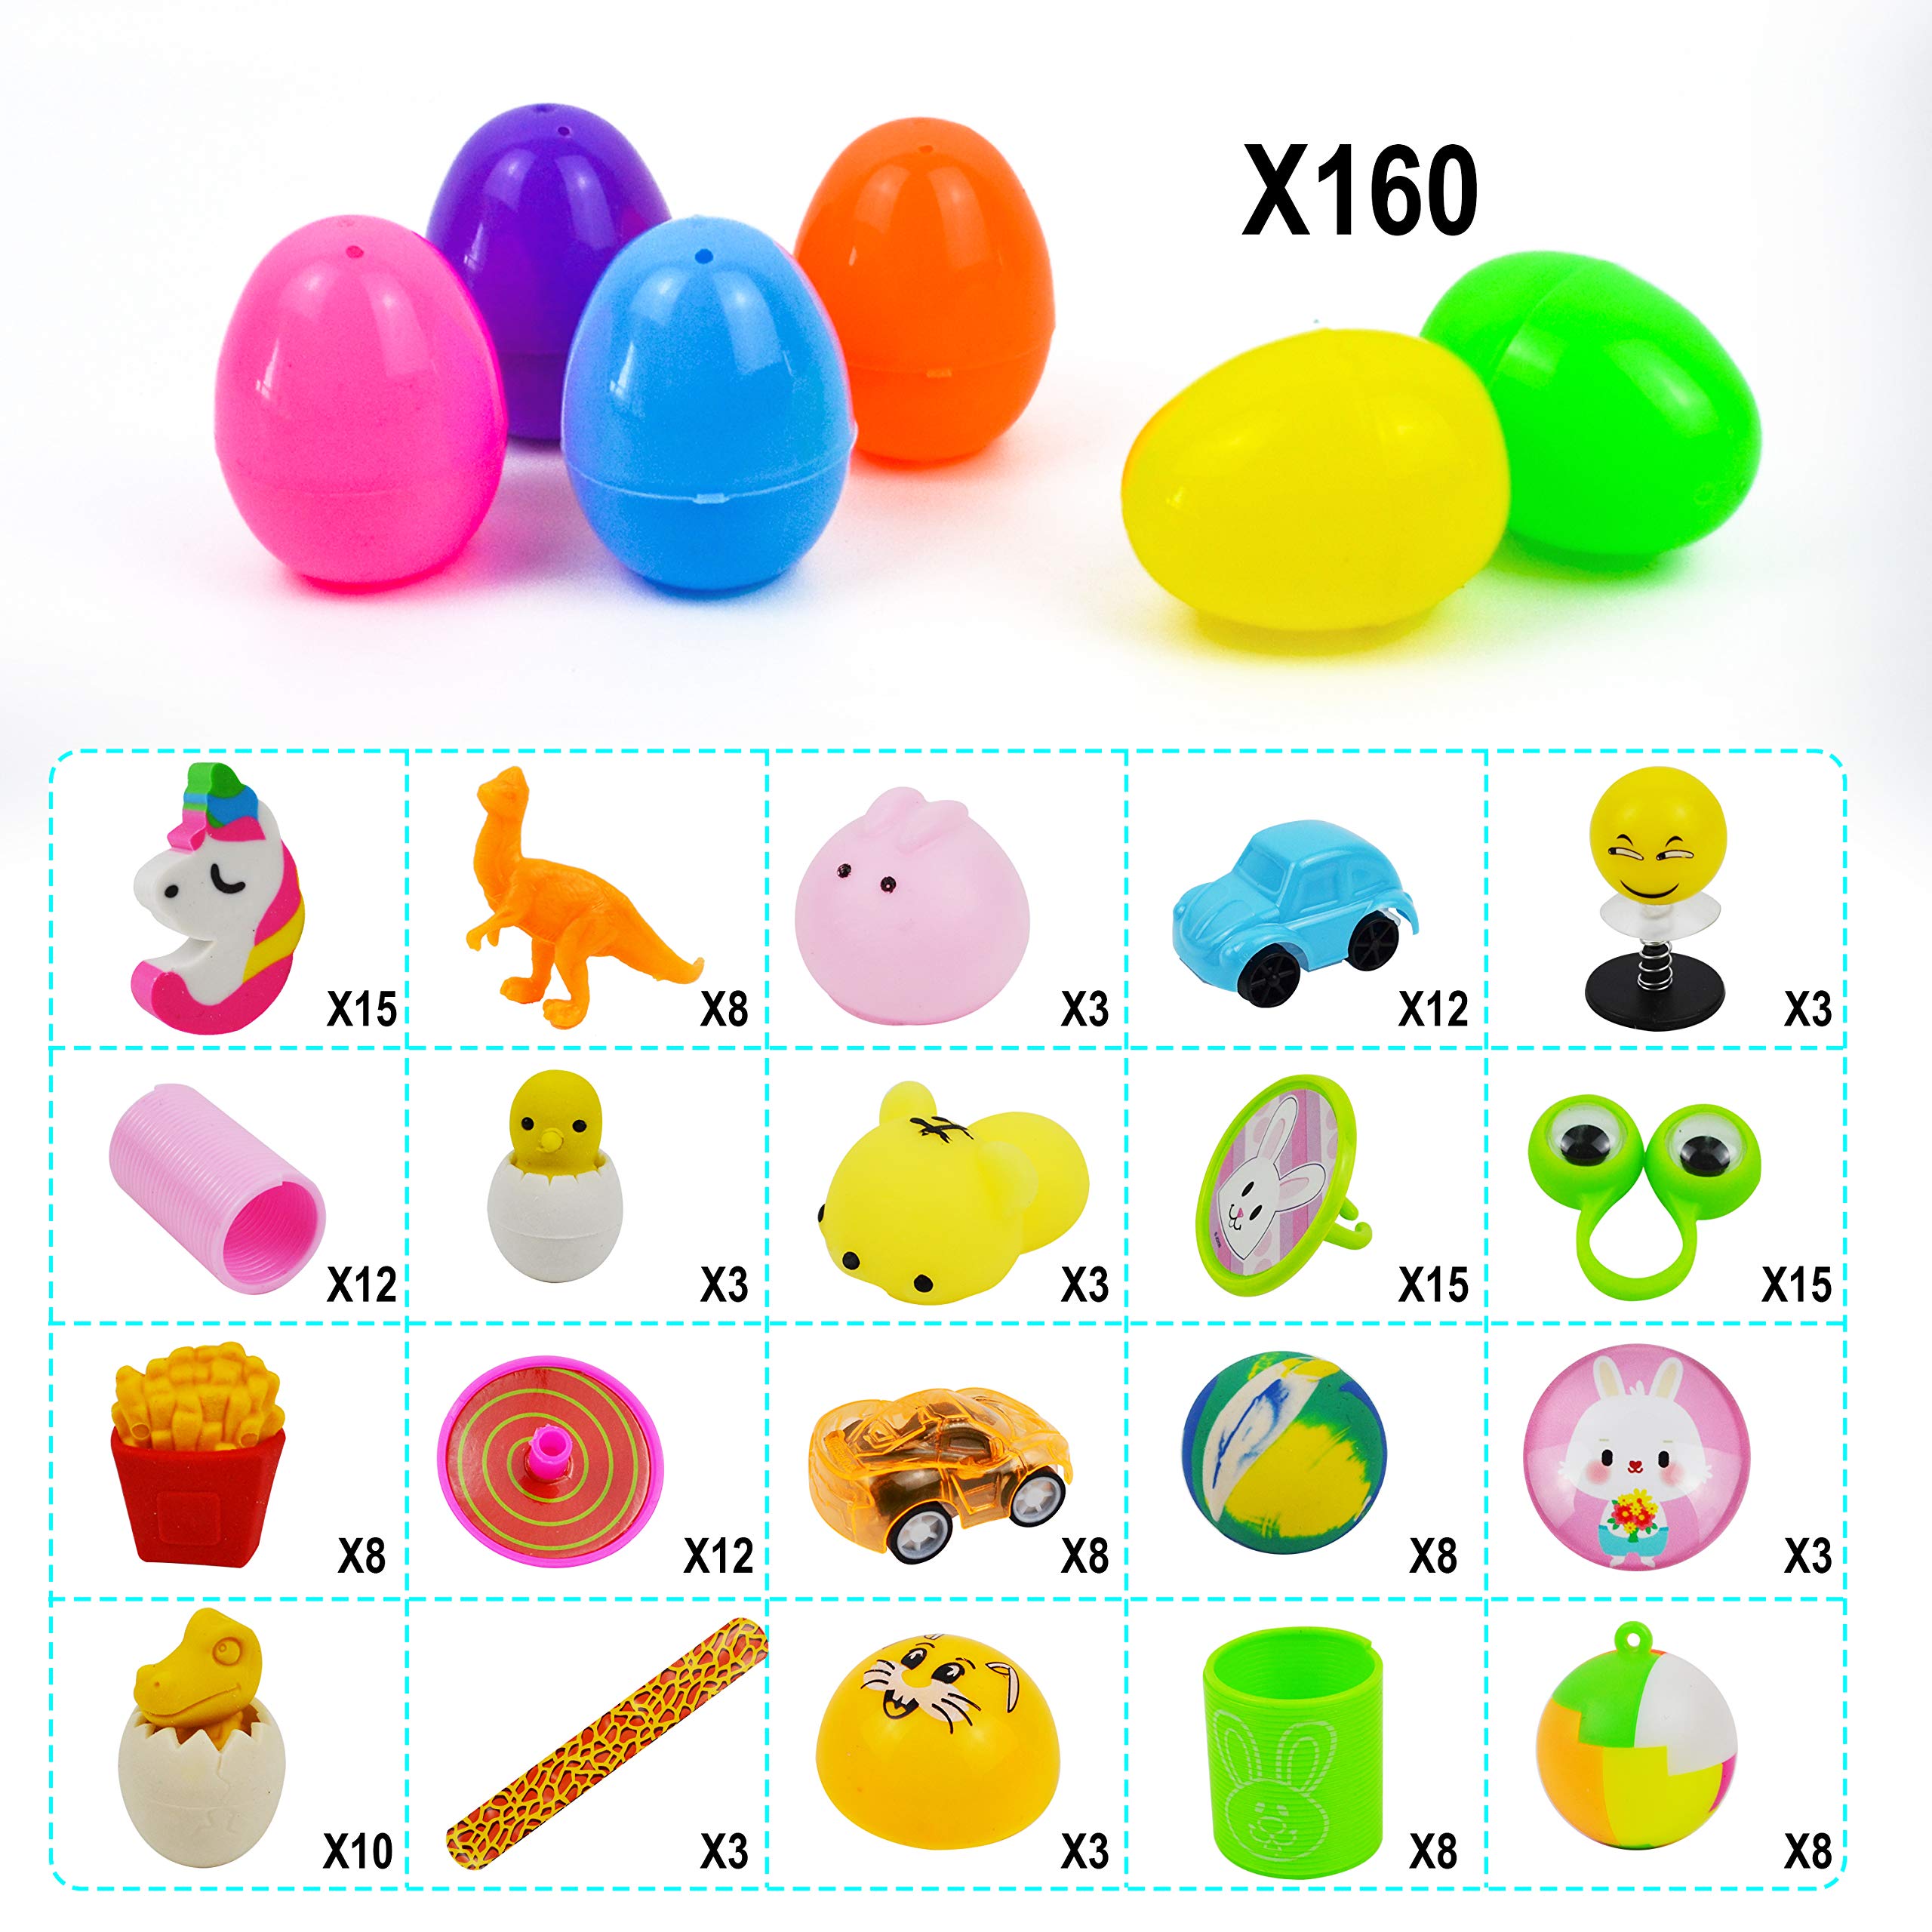 JOYIN 160 PCS Prefilled Easter Eggs with Assorted Toys, Easter Stuffed Eggs for Easter Egg Hunt Supplies, Easter Basket Stuffers Fillers, Easter Classroom Prizes, Easter Party Favors